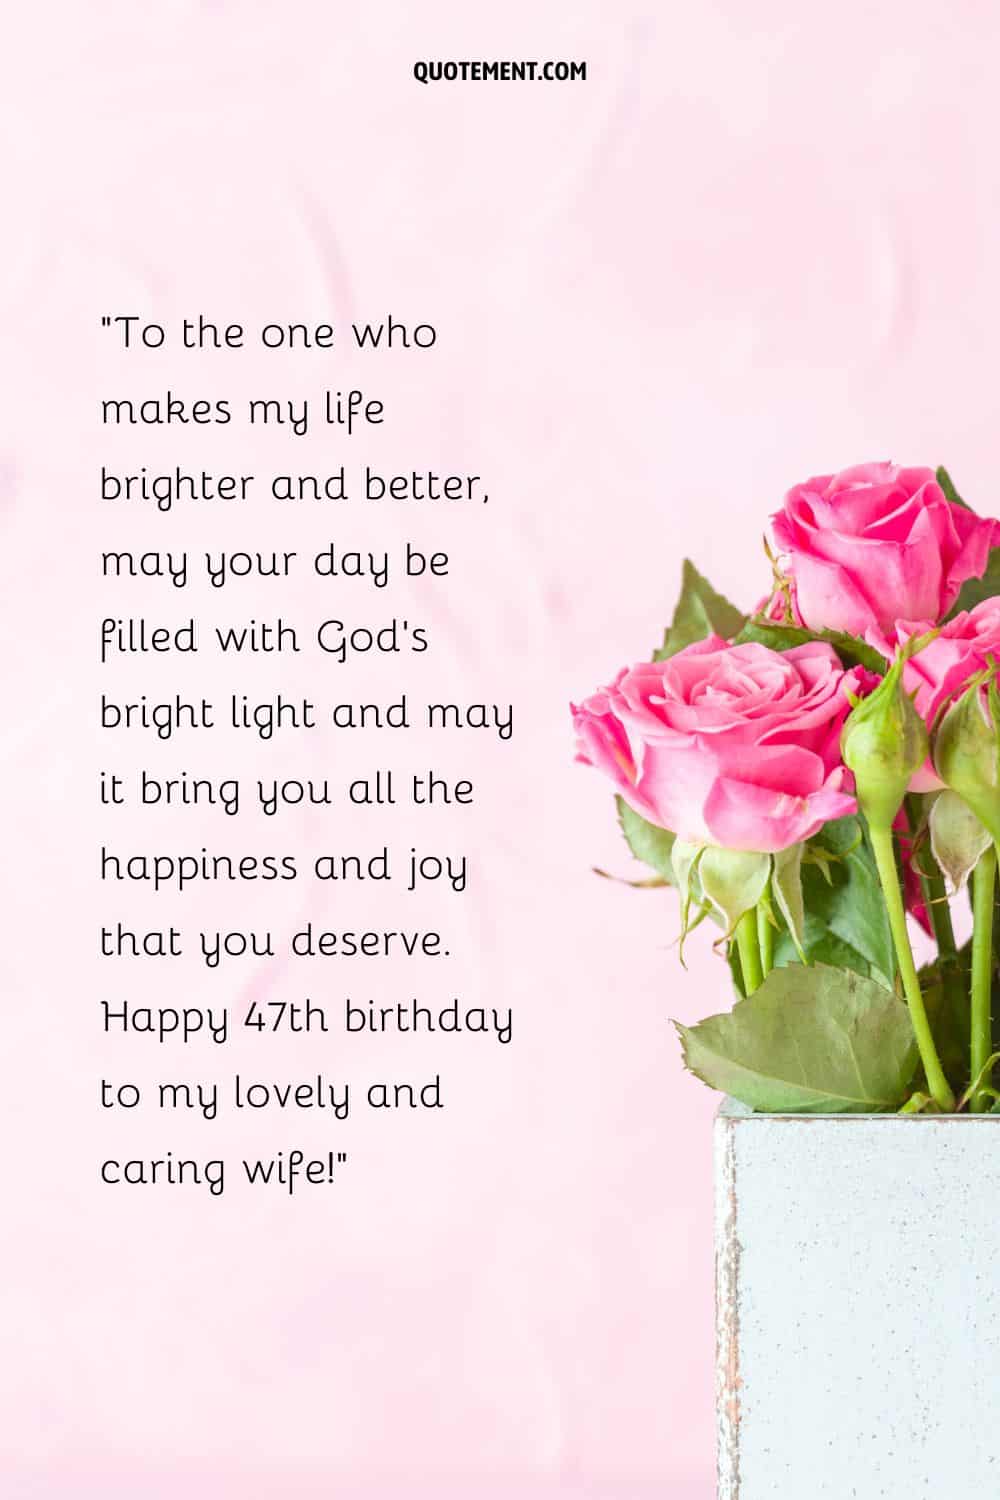 Heartfelt message for a wife's 47th birthday and pink roses next to it
